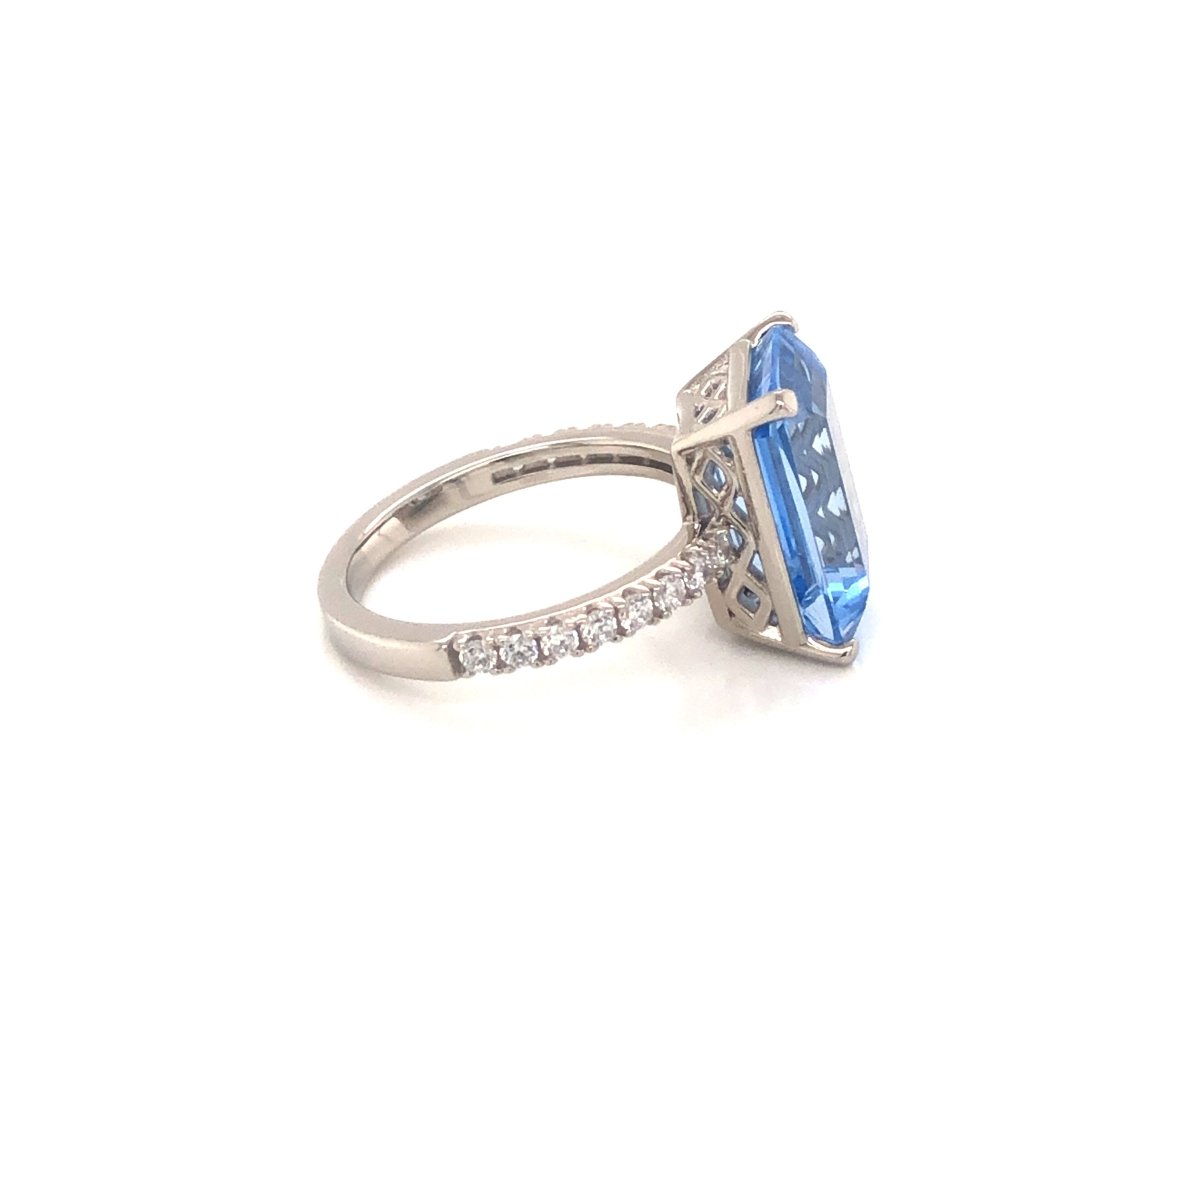 8.00ct Emerald Cut Blue Spinel &amp; Cubic Zirconia Ring Set in Rhodium Plated Silver